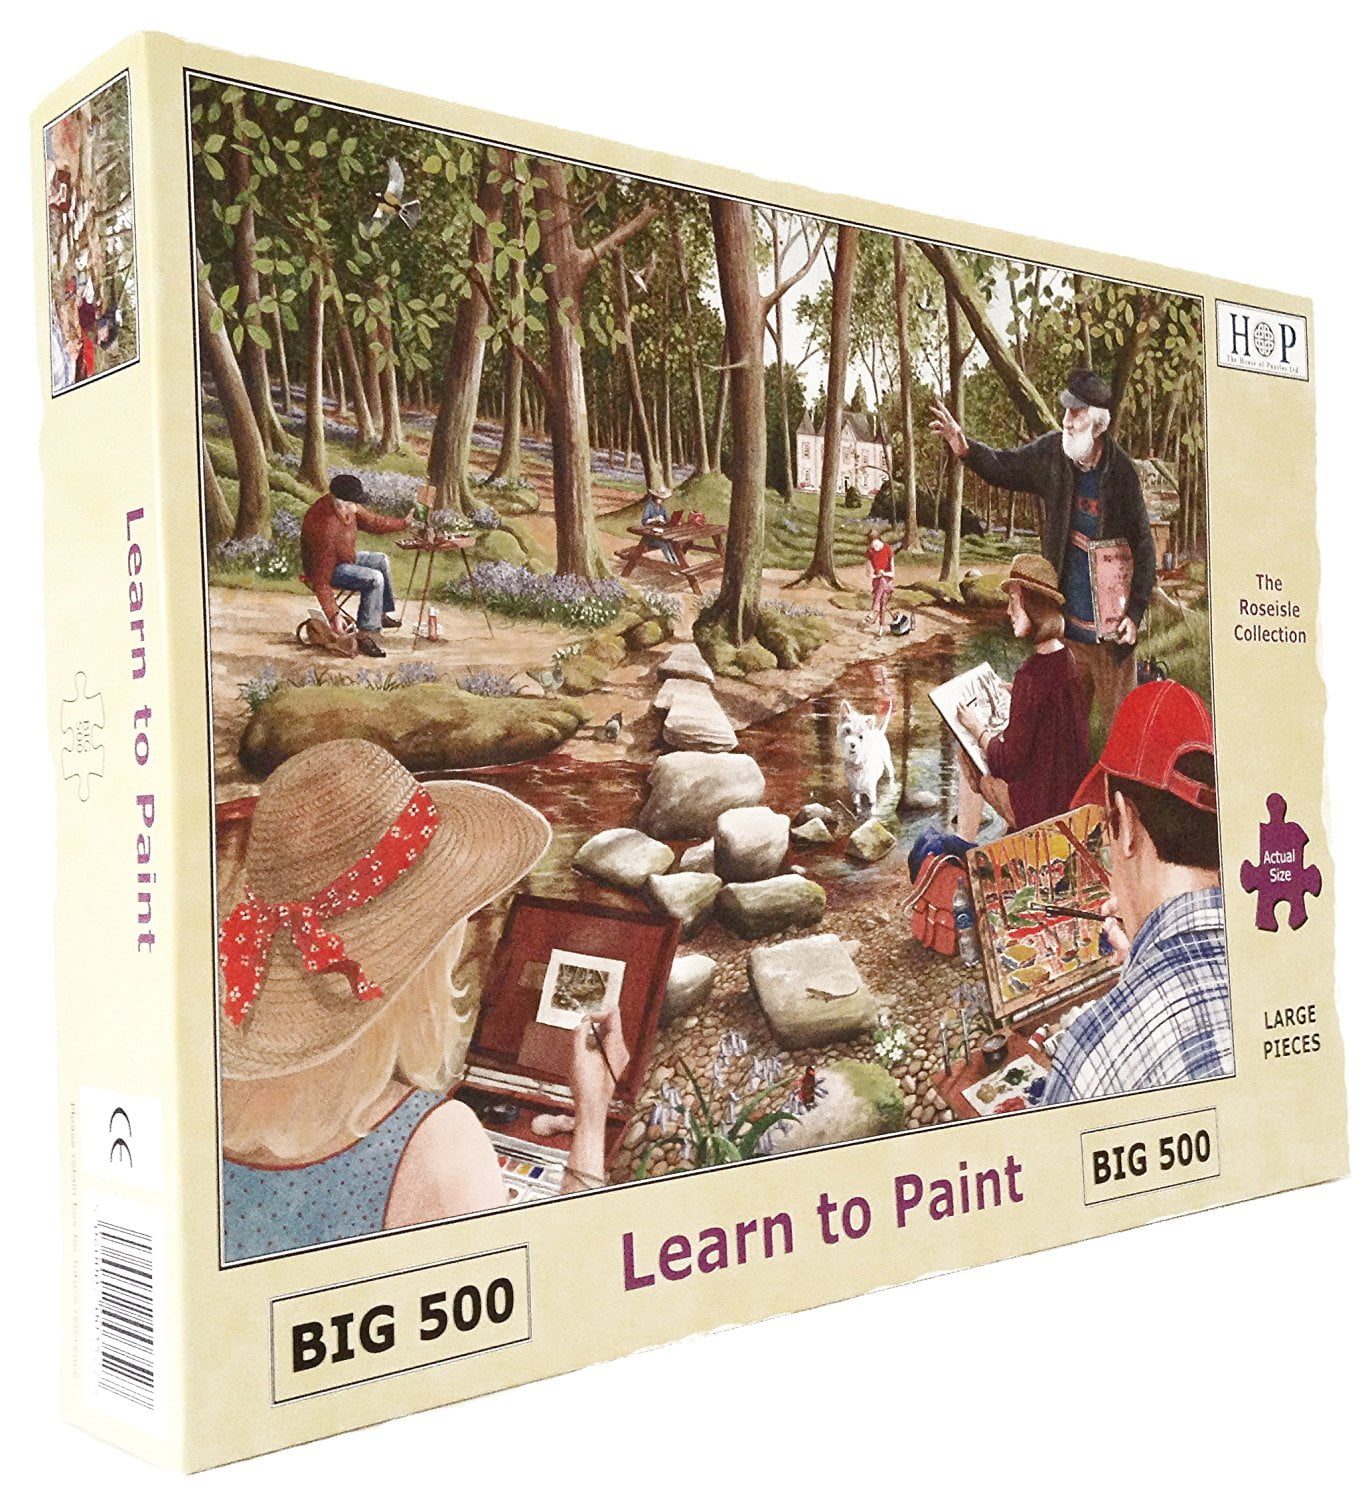 Learn to Paint 500 LGE PC Jigsaw Puzzle